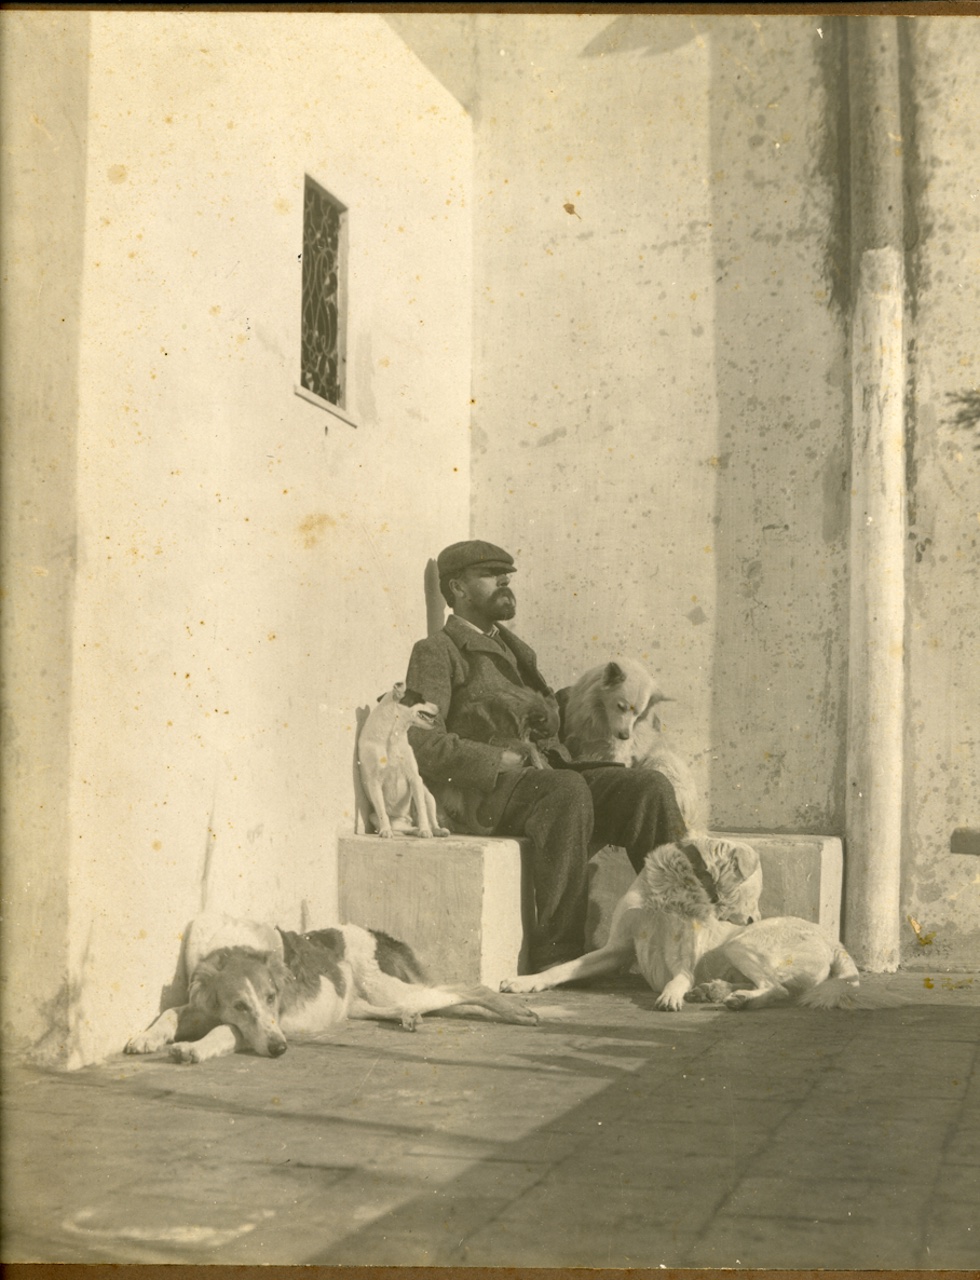 Munthe and his beloved dogs